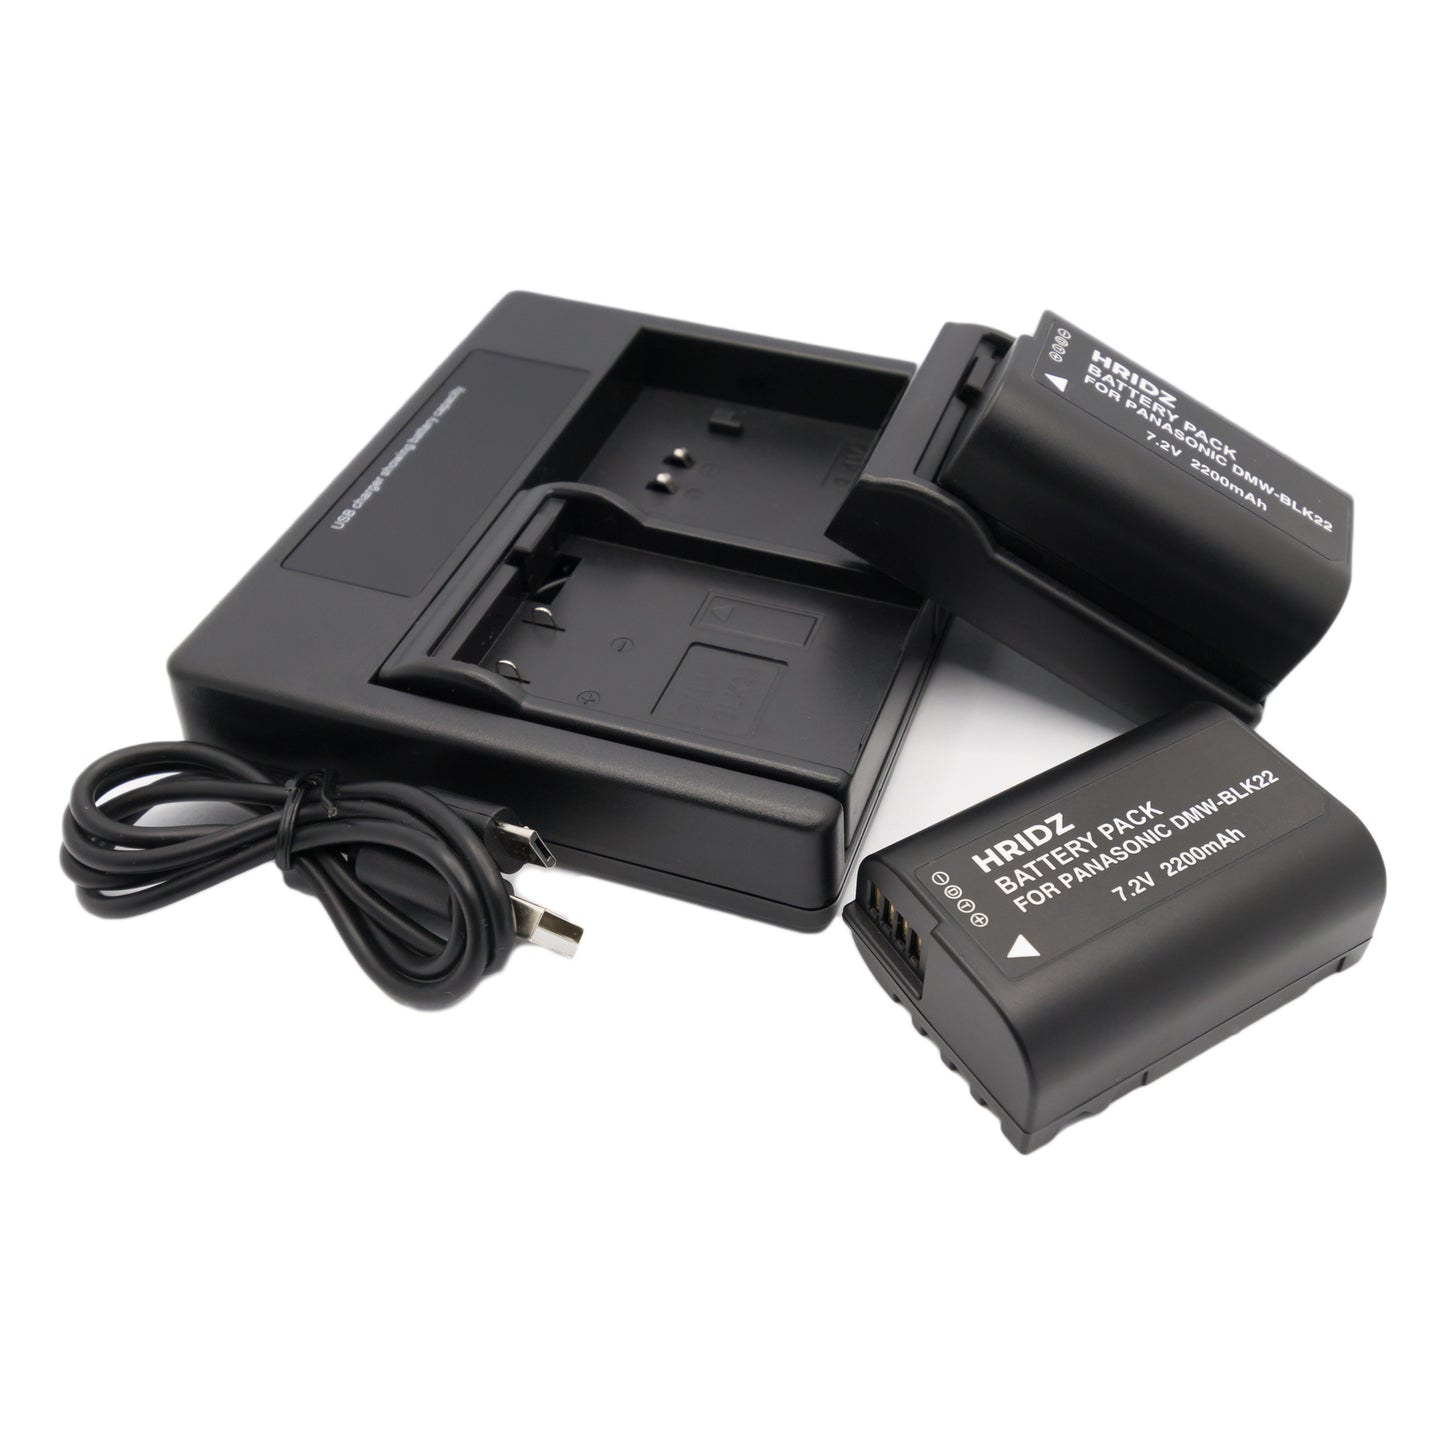 Hridz BLK22 Battery & Dual Charger Set for Panasonic Lumix DC-S5, GH6, GH5, and GH5S